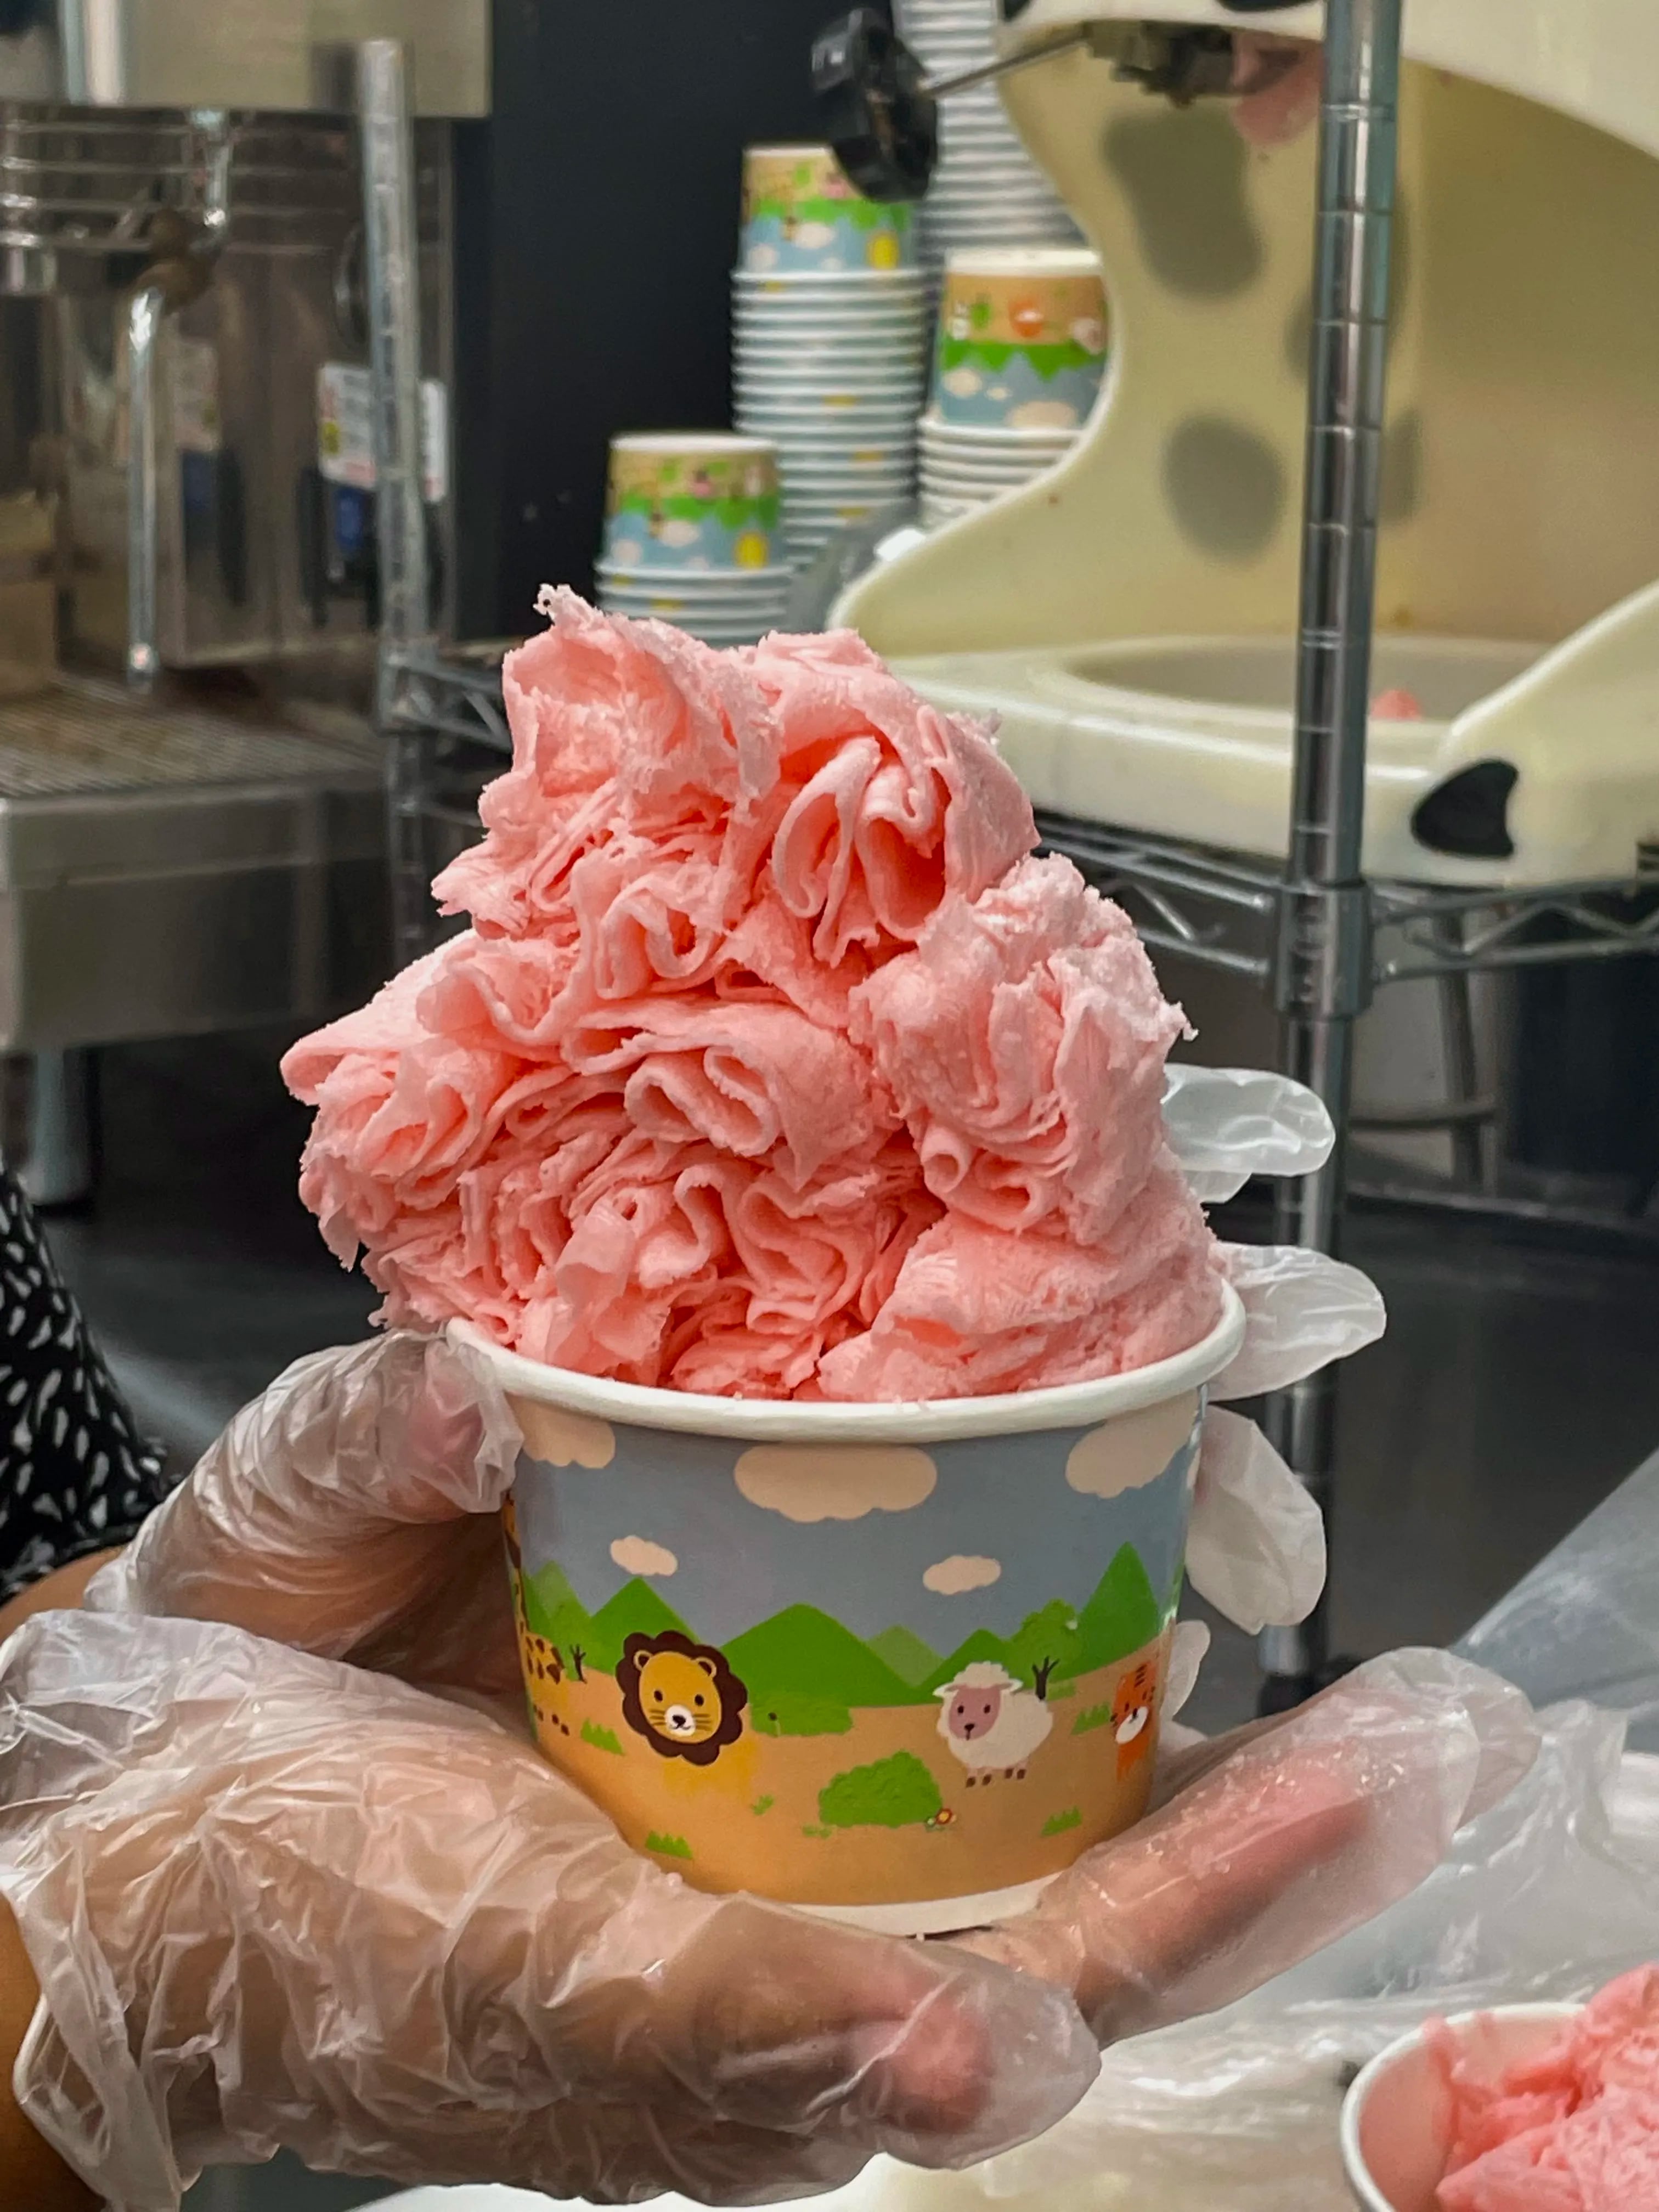 Where to get rolled ice cream in Central Pennsylvania